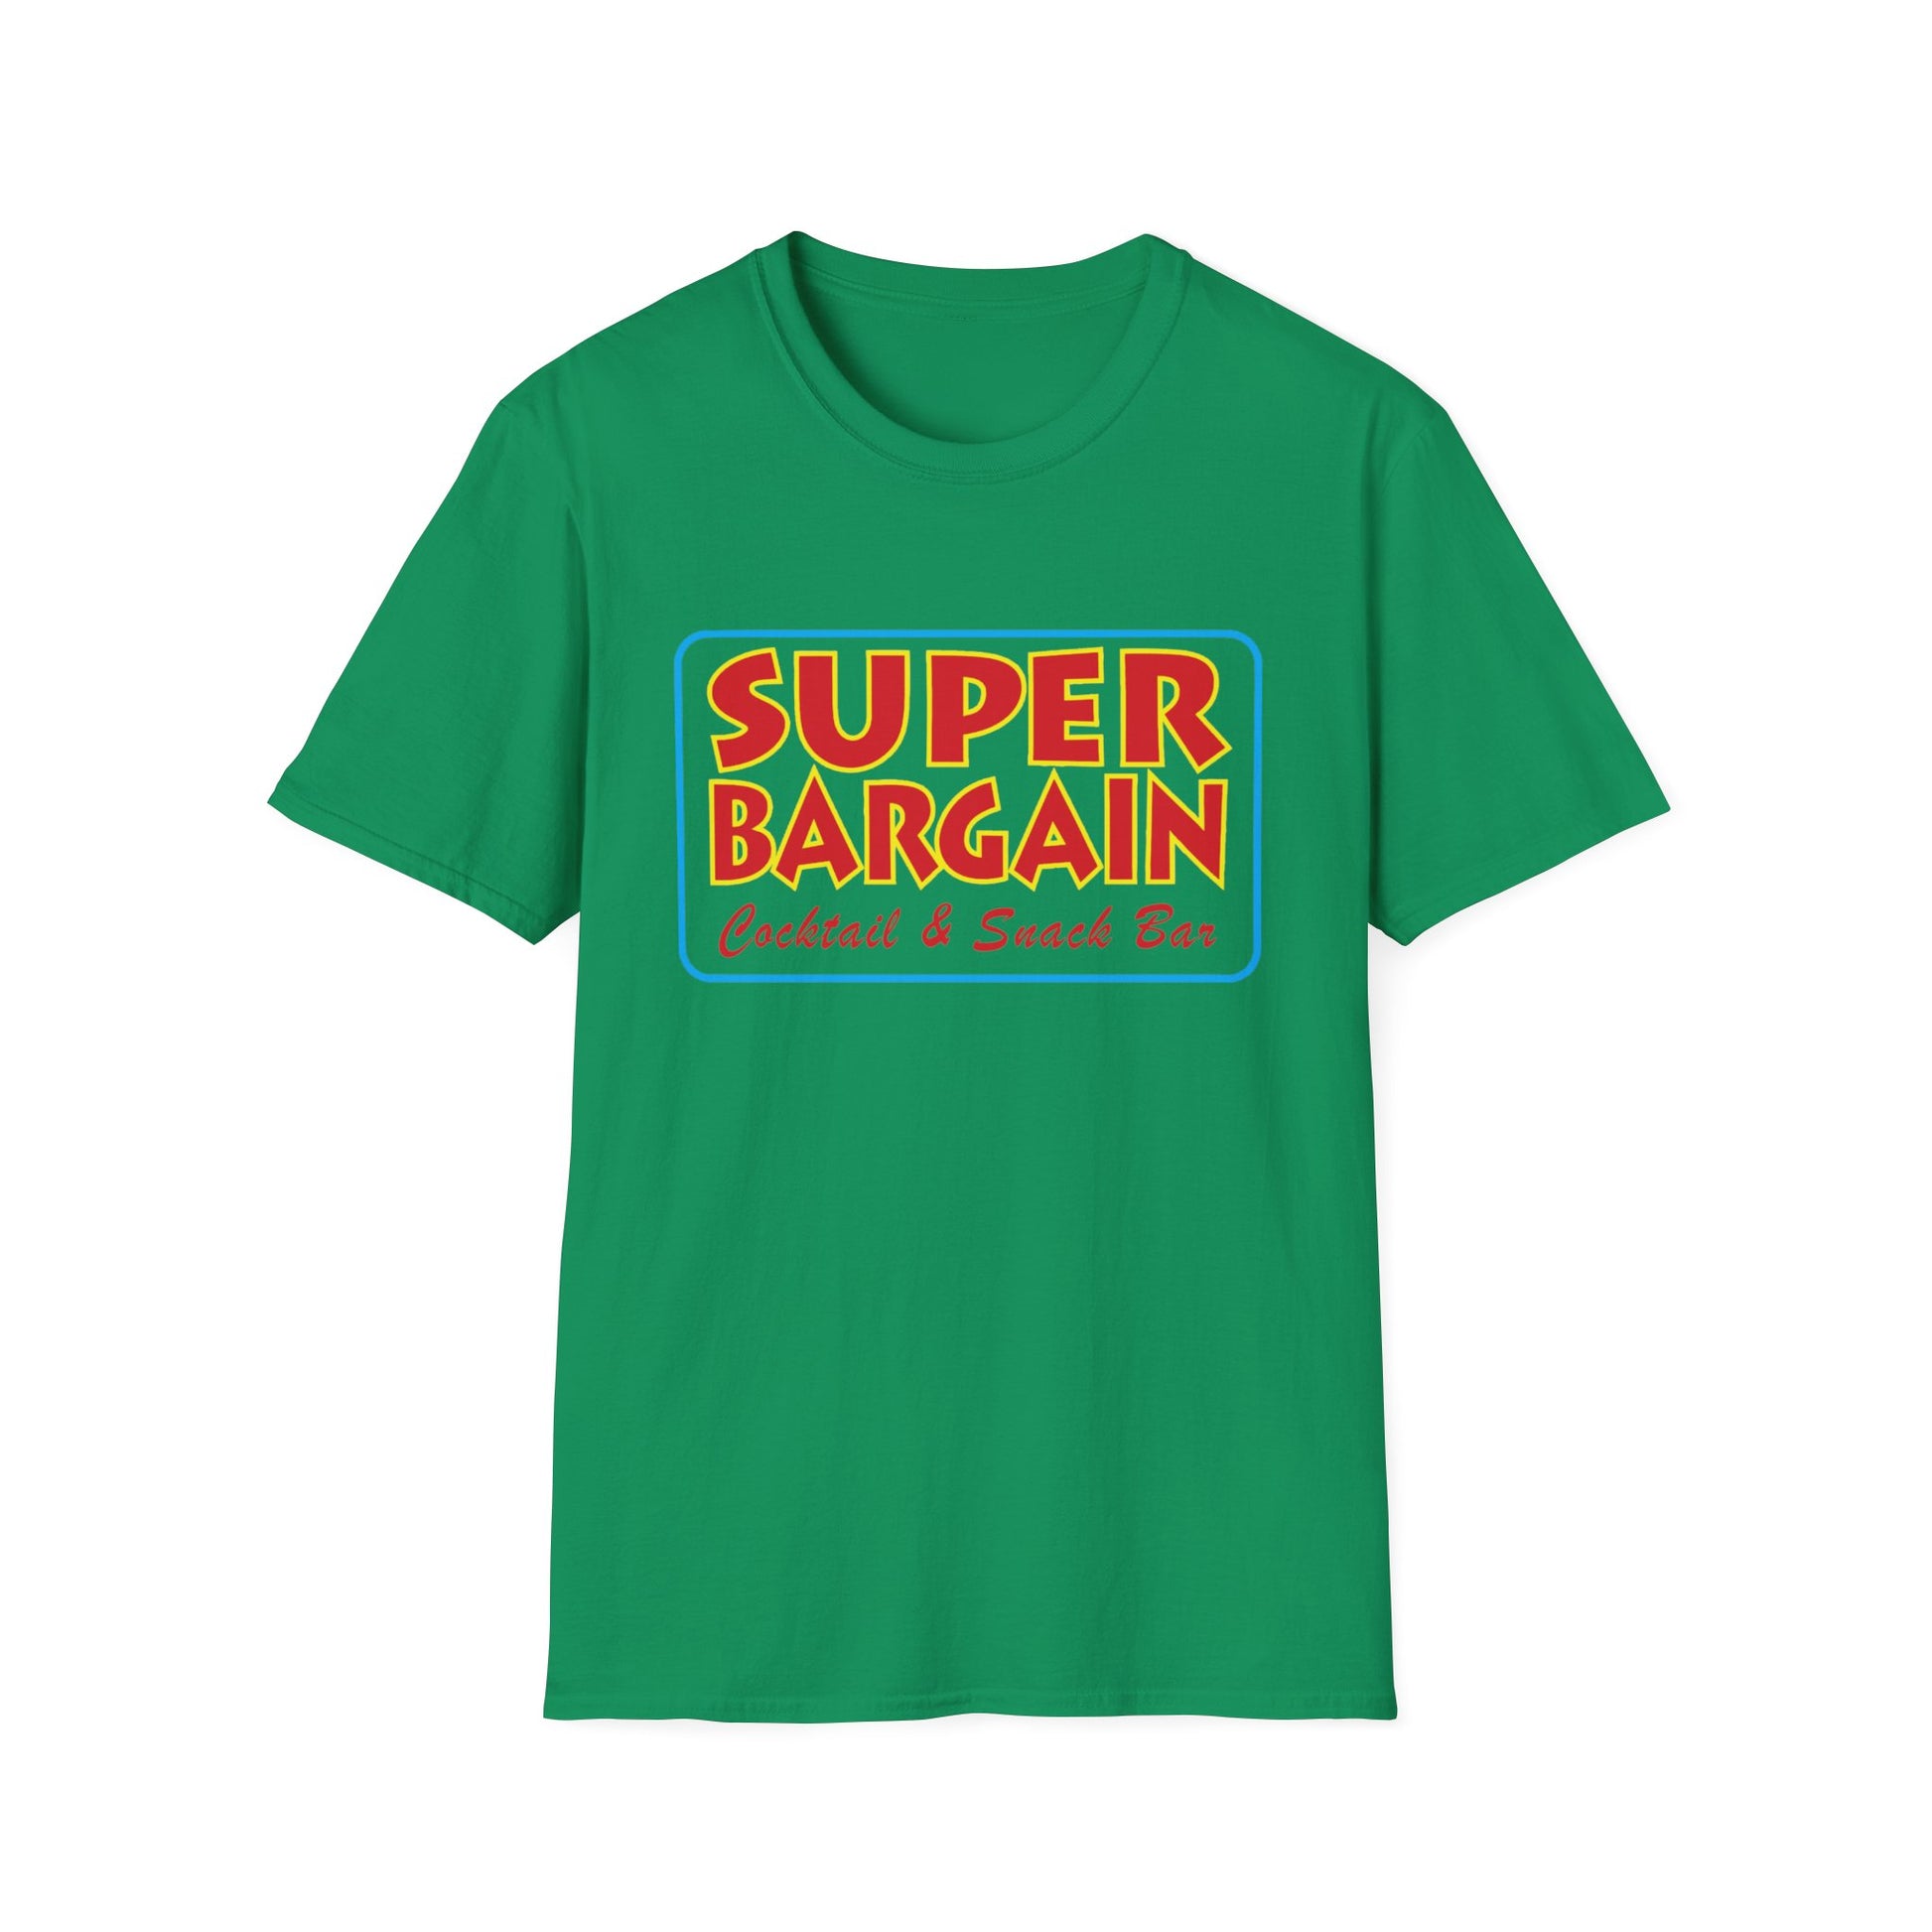 A green Unisex Softstyle Logo T-Shirt with the words "SUPER BARGAIN - Crafted & Good Buy" in yellow and red retro font on the chest area, presented on a plain white background, featuring a small Toronto logo by Printify.